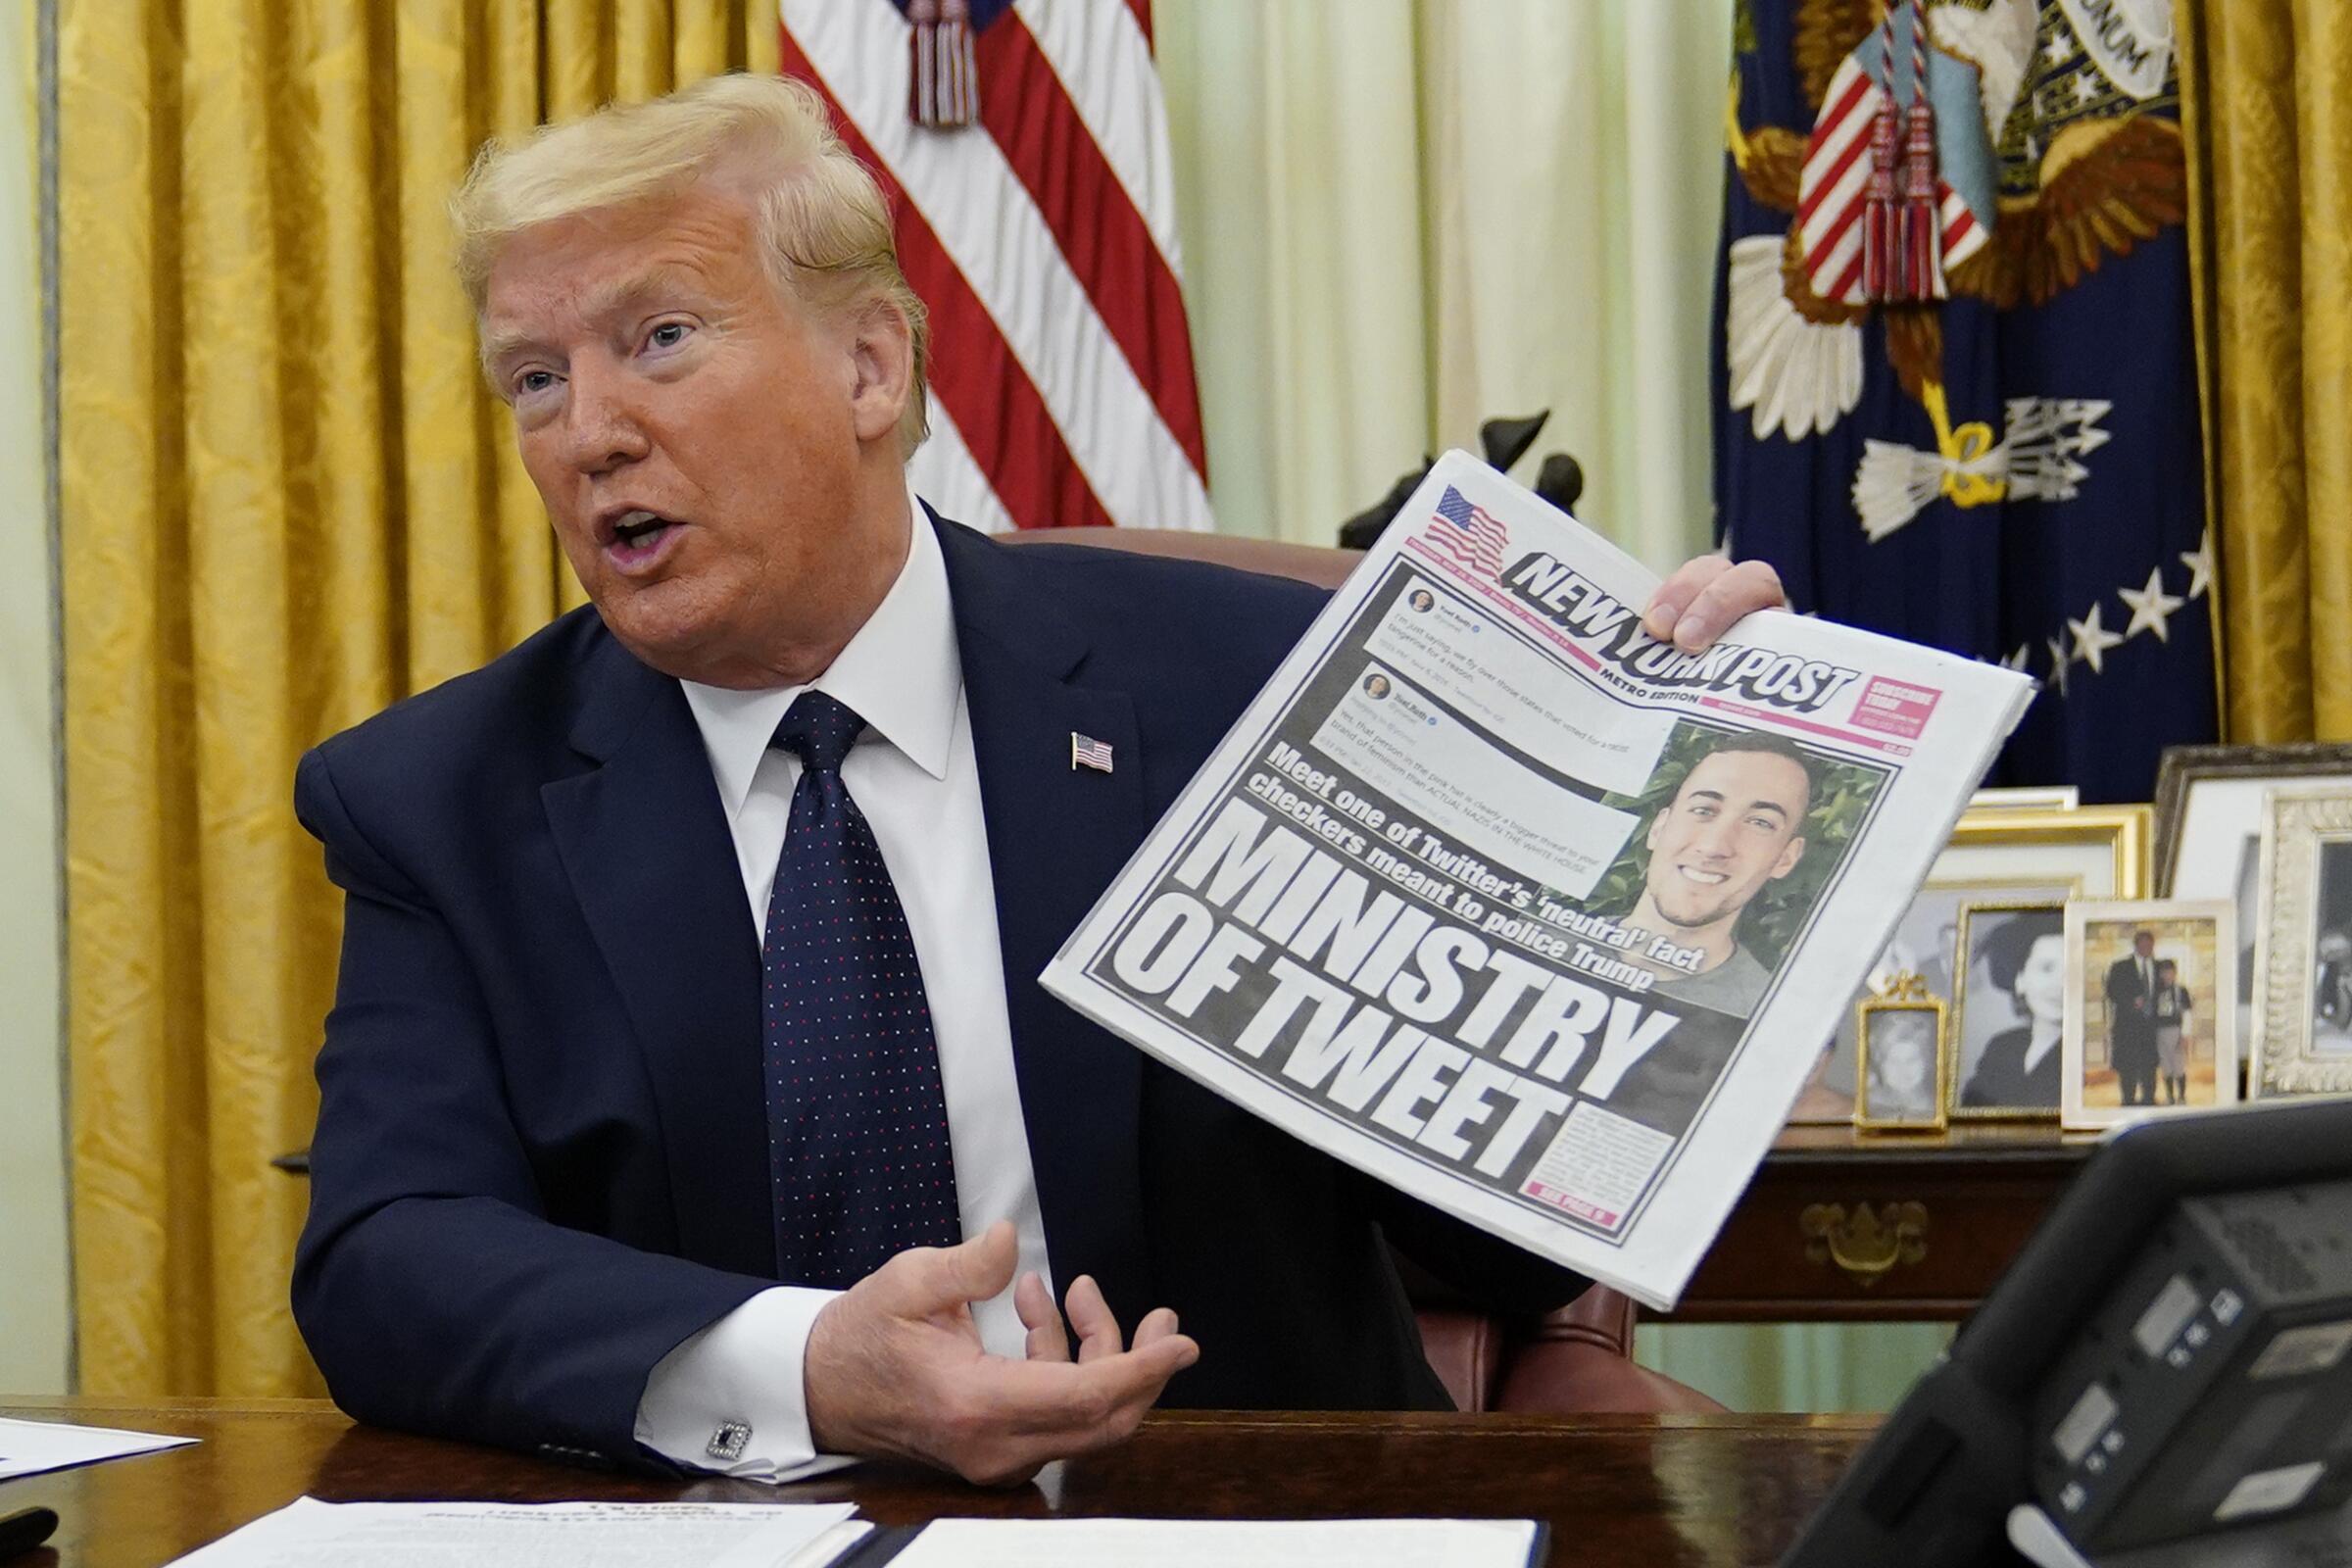 President Trump holds up a copy of the New York Post at the White House before signing an executive order aimed at curbing protections for social media giants.